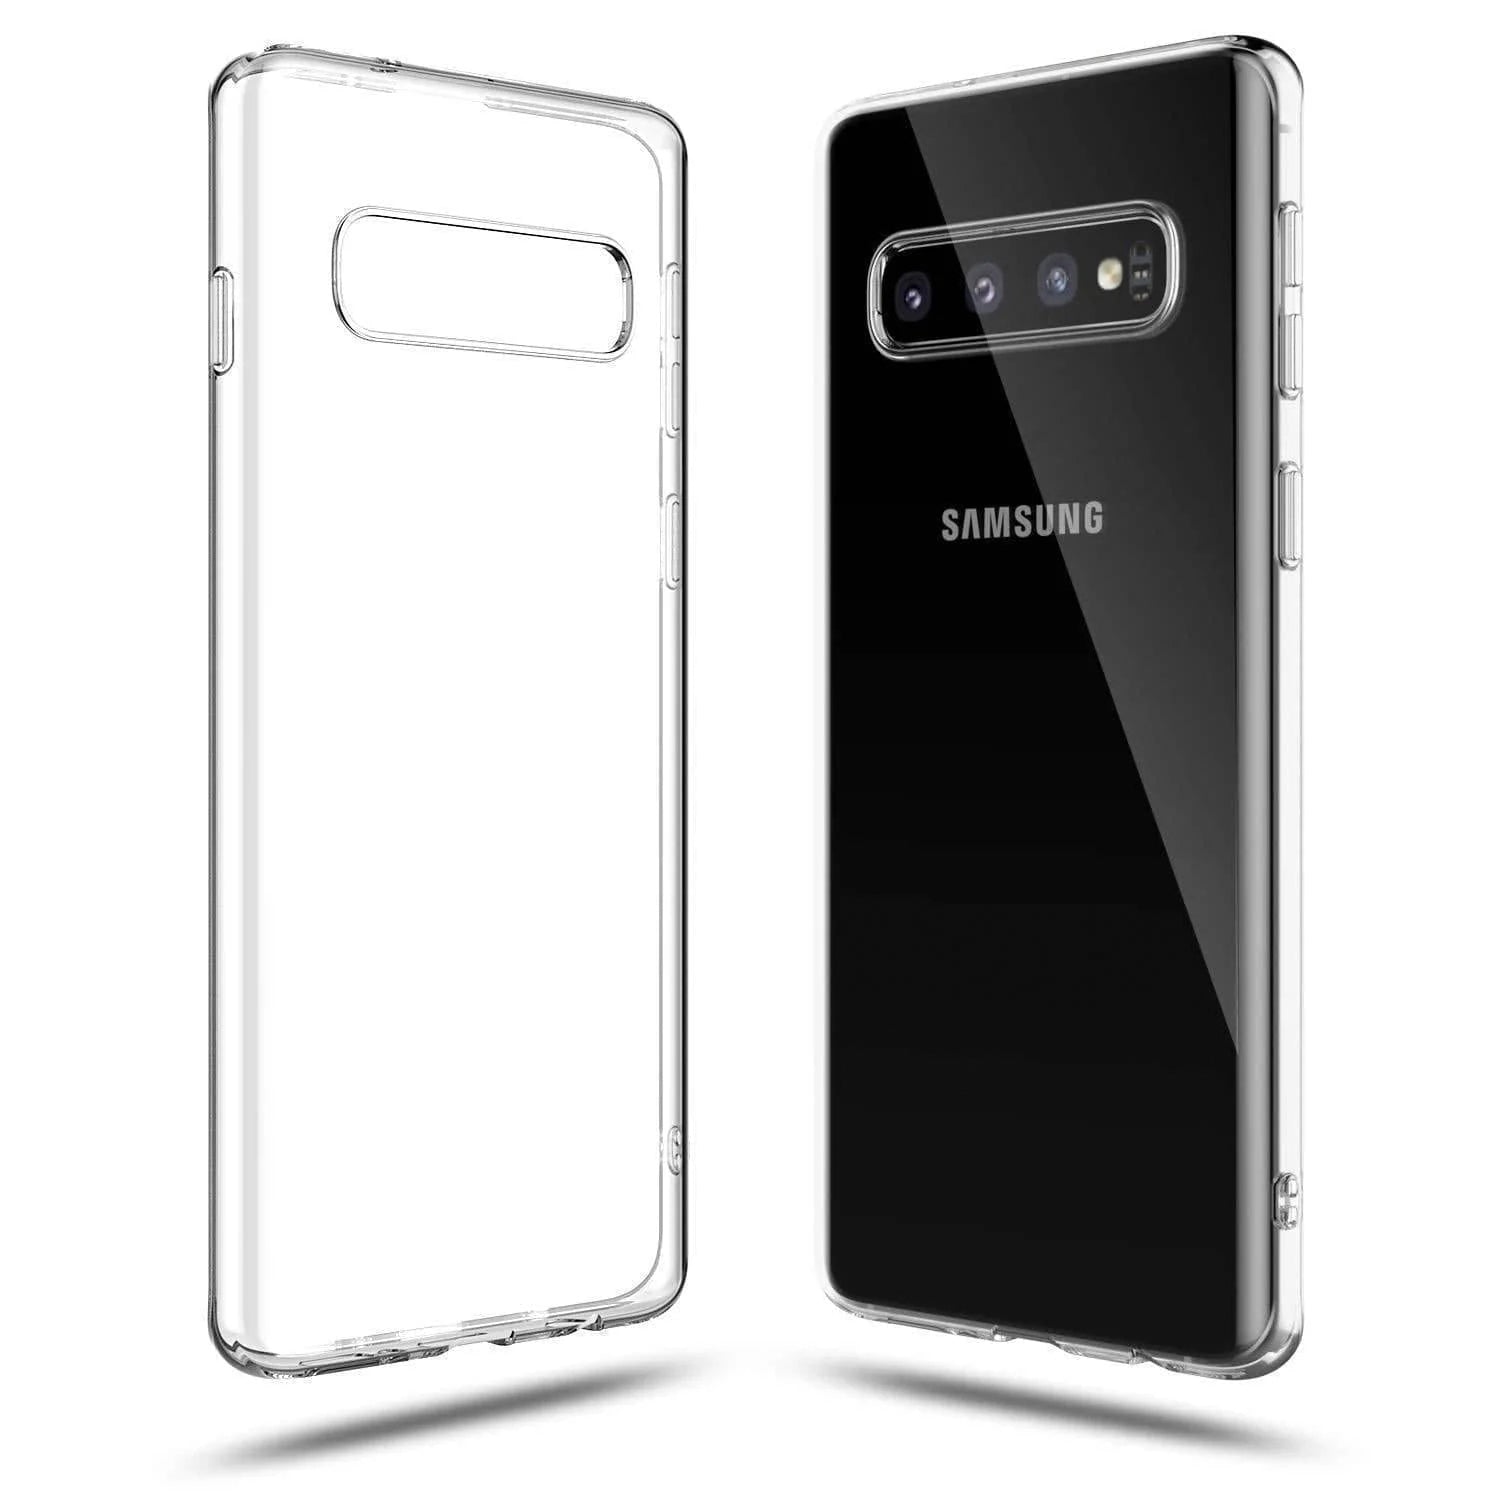 Transparent TPU Case Shockproof Drop Resistant Case Cover for Galaxy S10-Clear